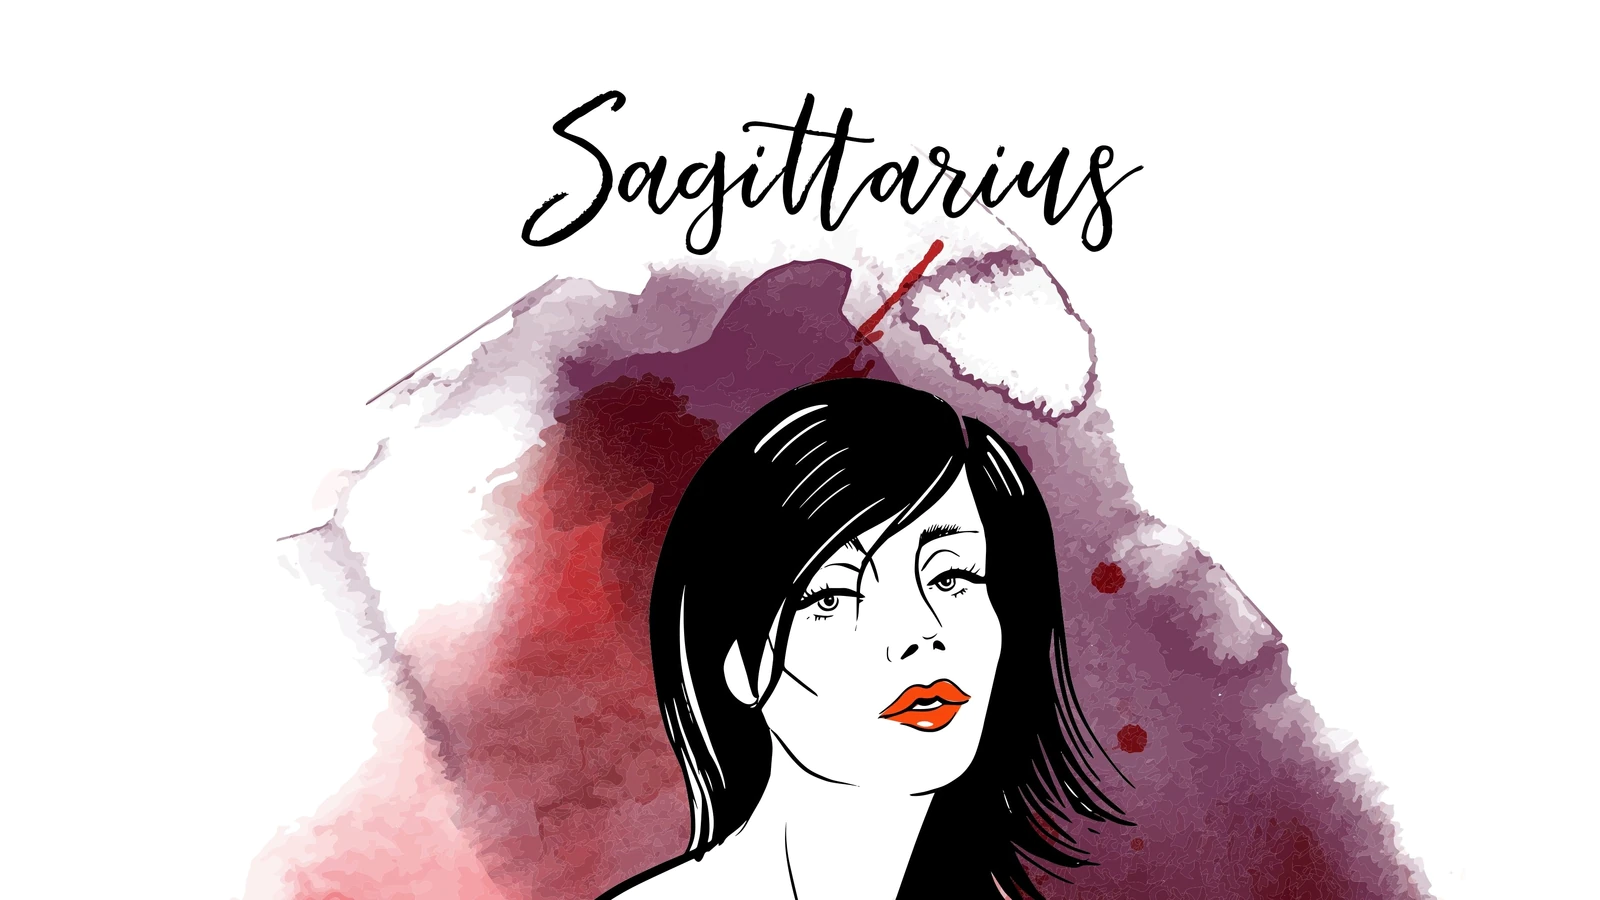 Sagittarius Daily Horoscope for February 27: Find out your health condition